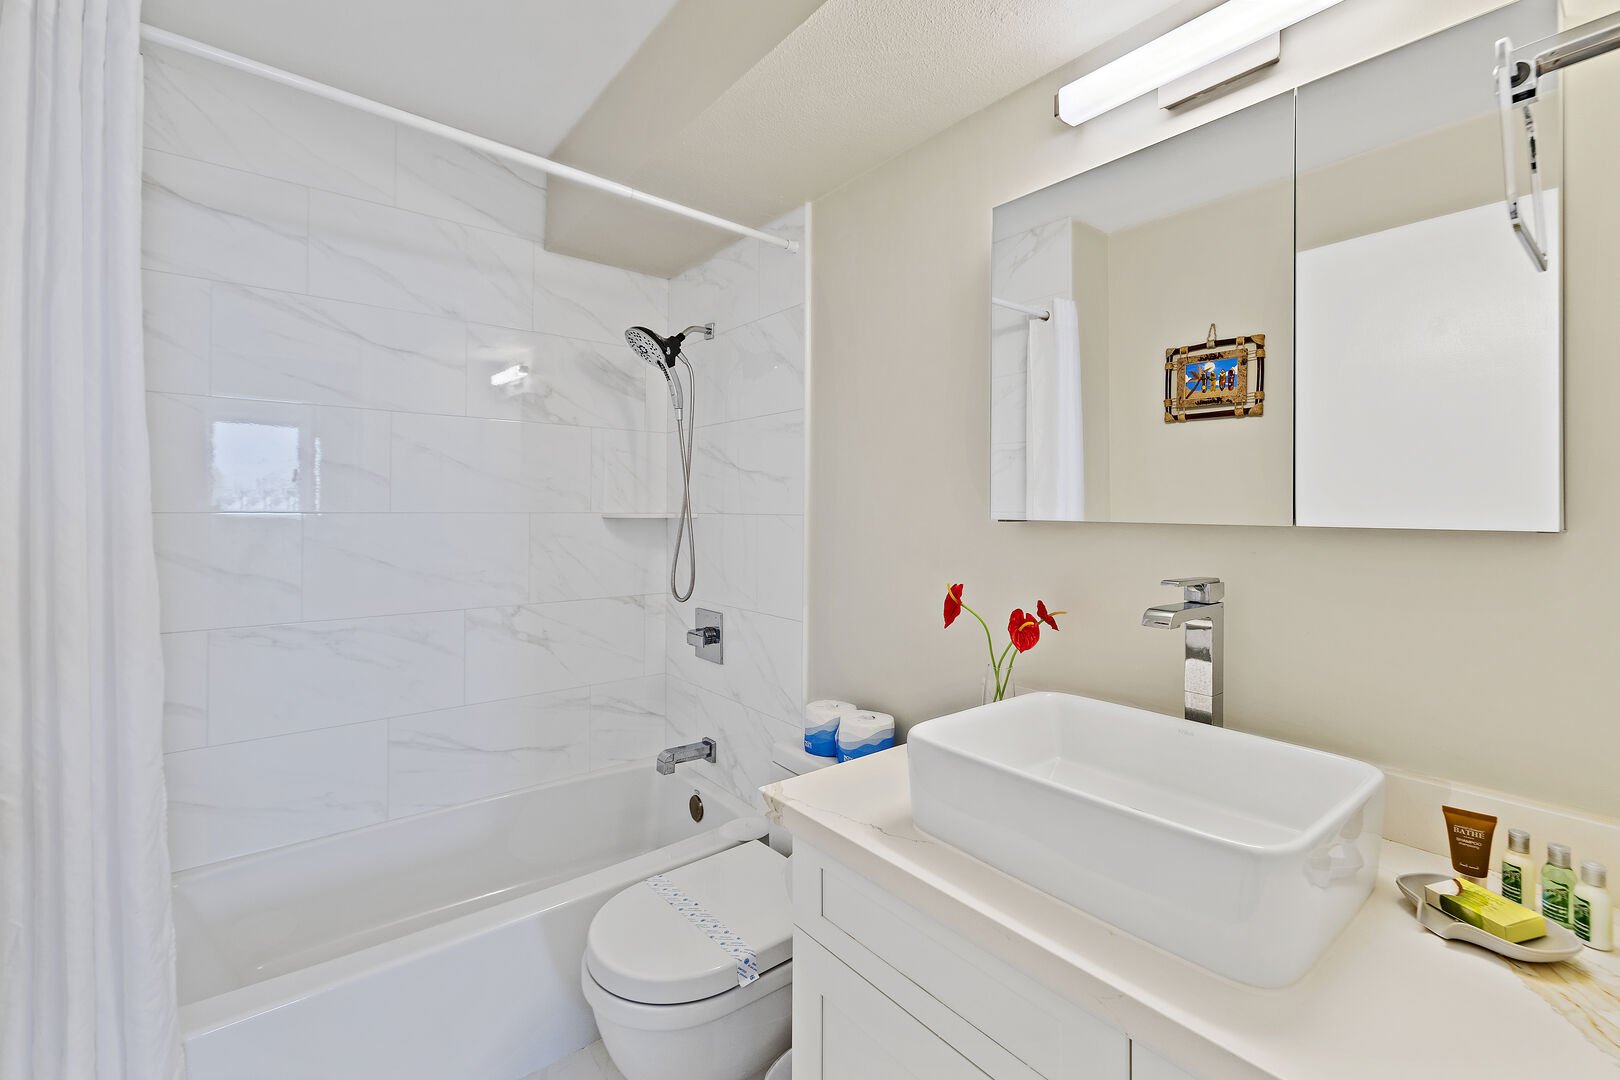 Full bathroom with tub and shower combo